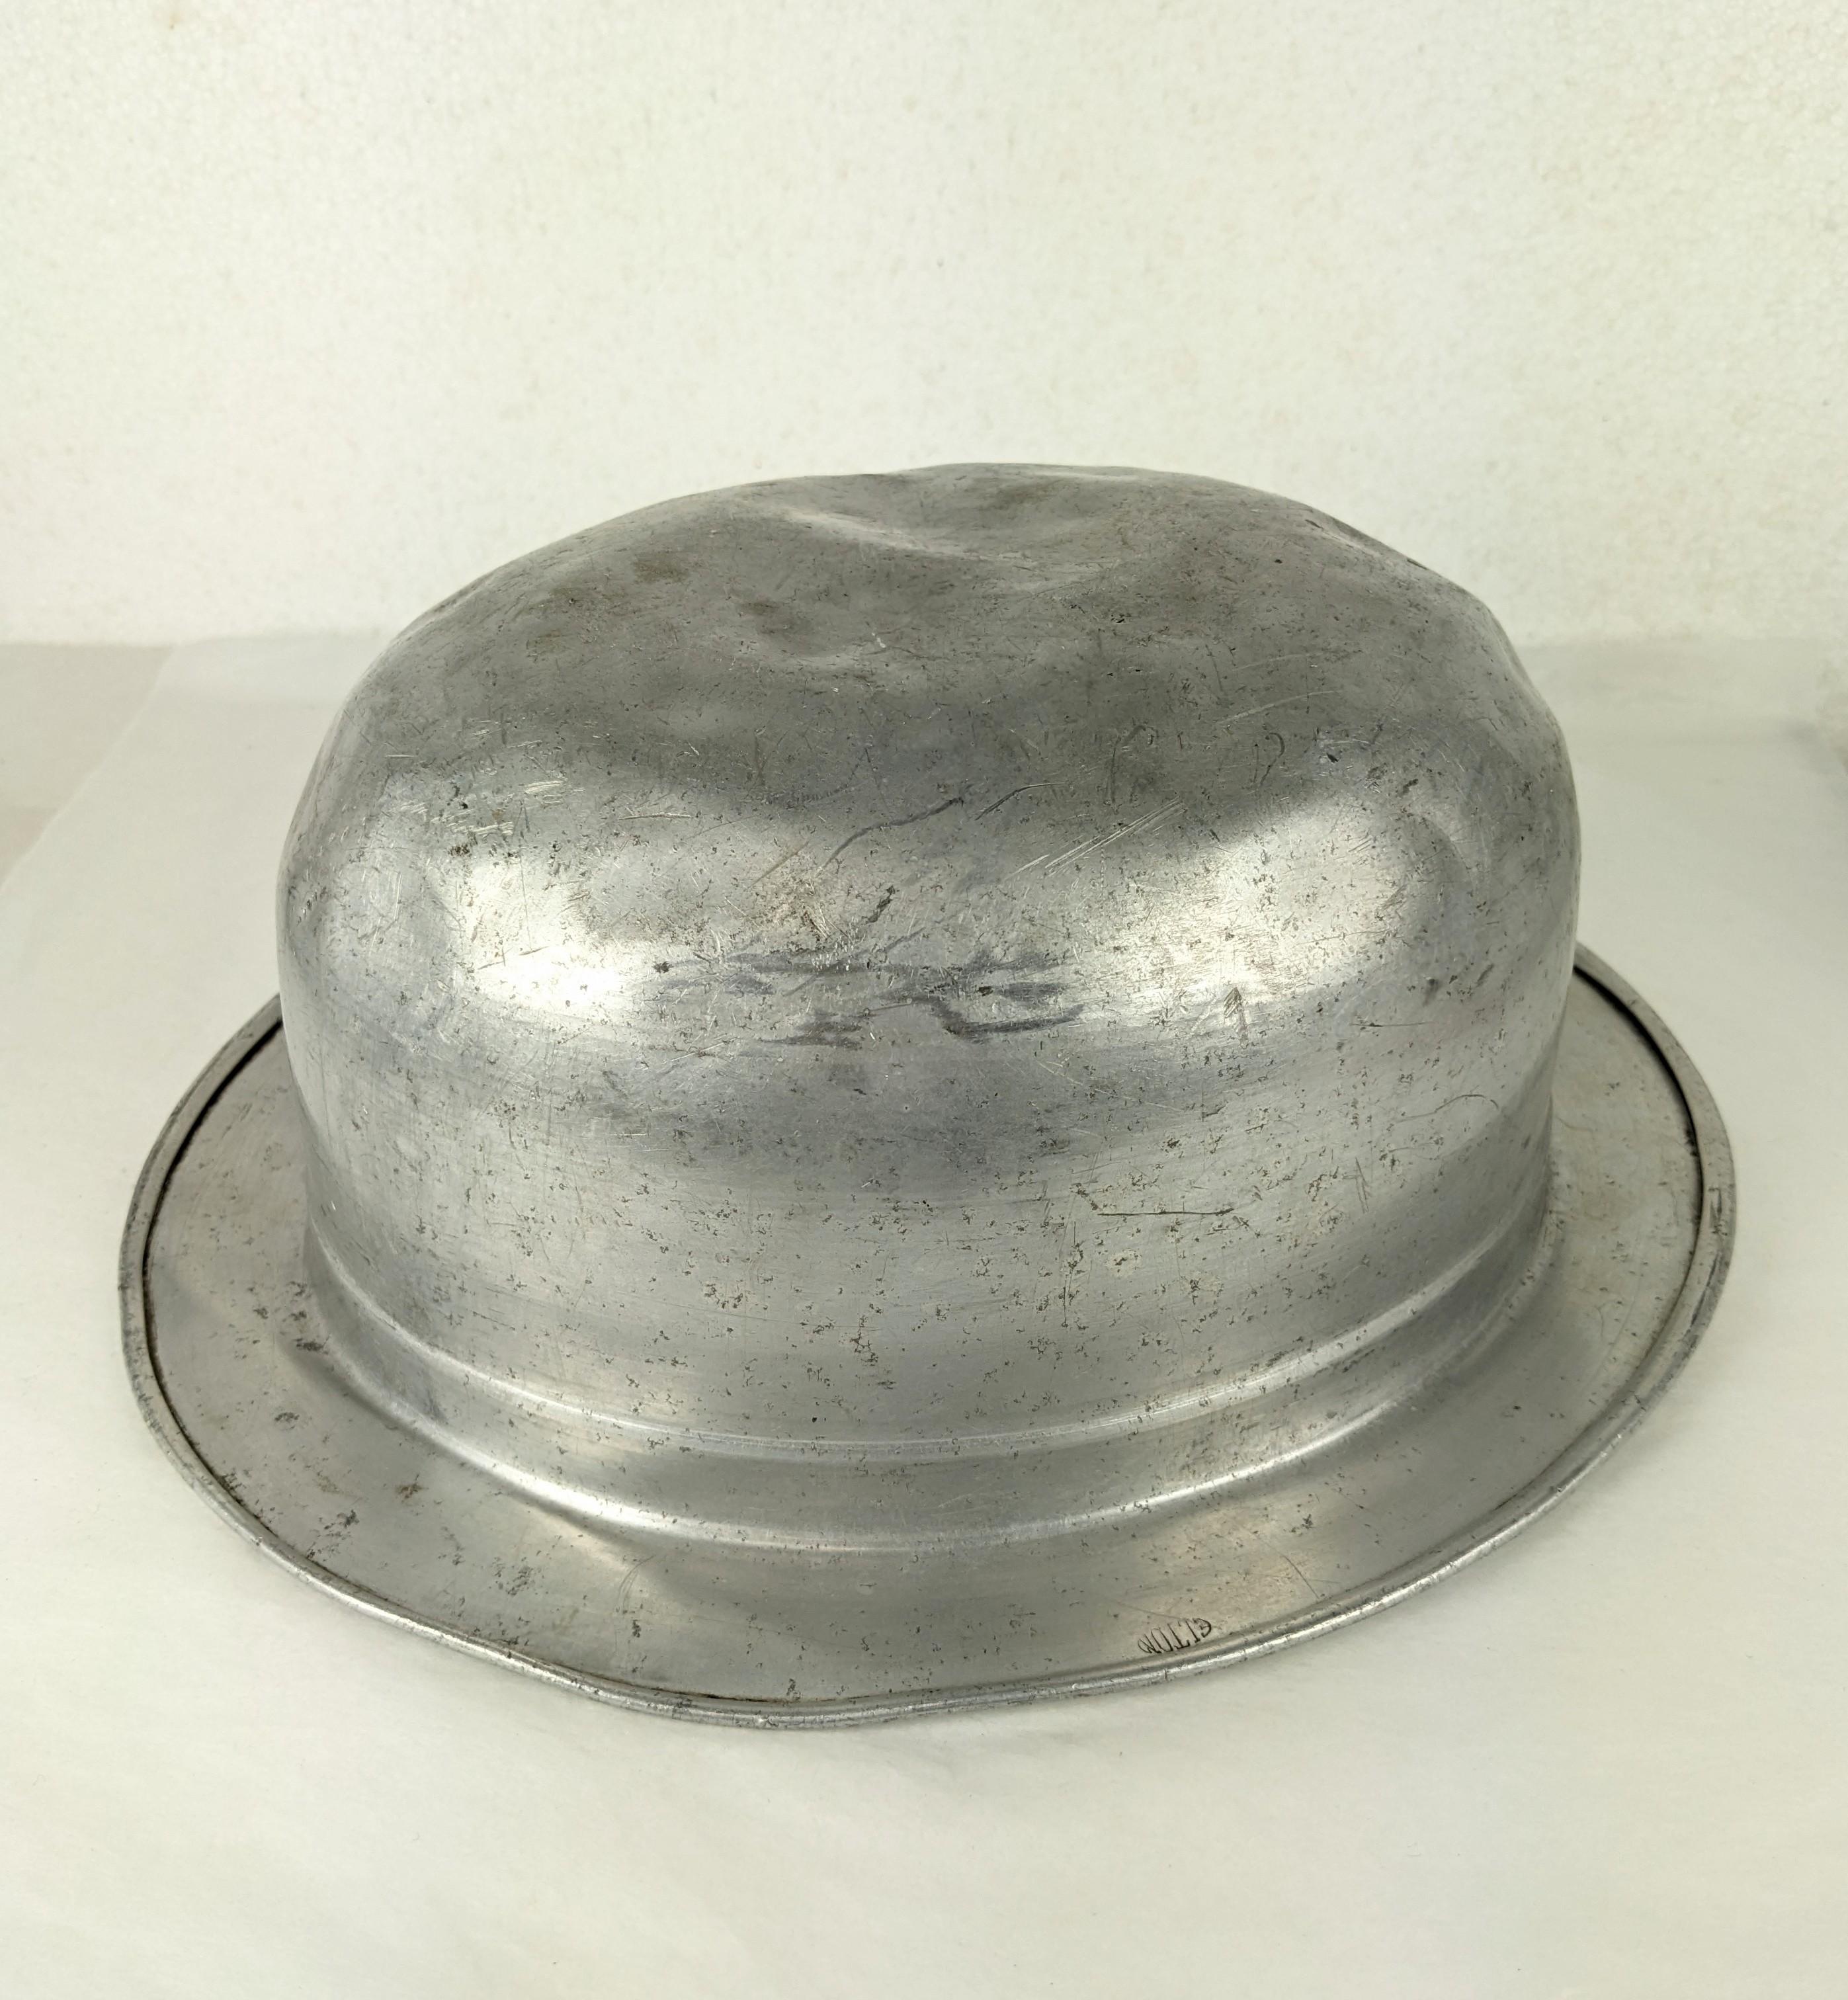 Turn of the Century Metal Bowler of molded sheet metal, possibly a salesmans sample or display item. 1930s. Marked ELTON. 10.5